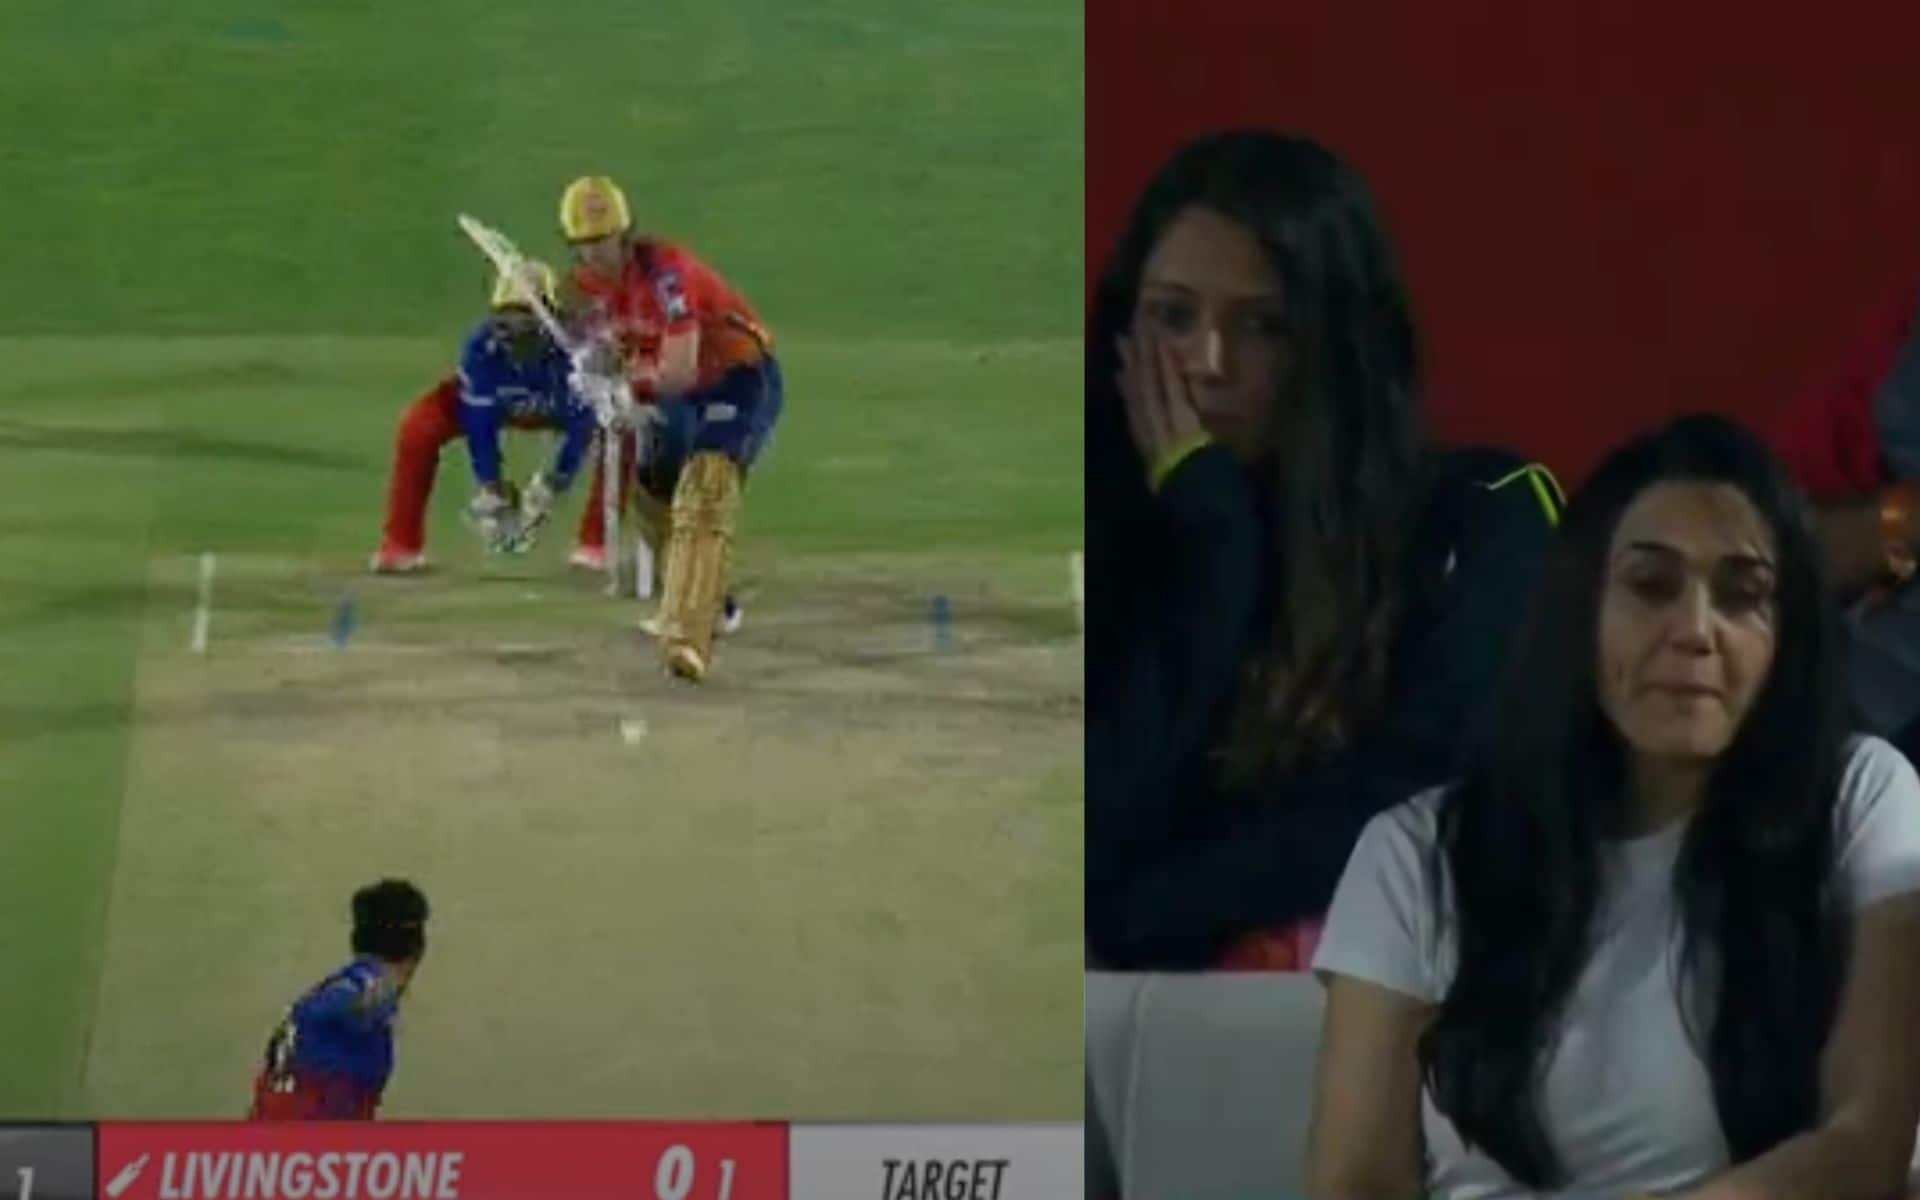 Zinta's reaction after Livingstone's wicket goes viral (x.com)